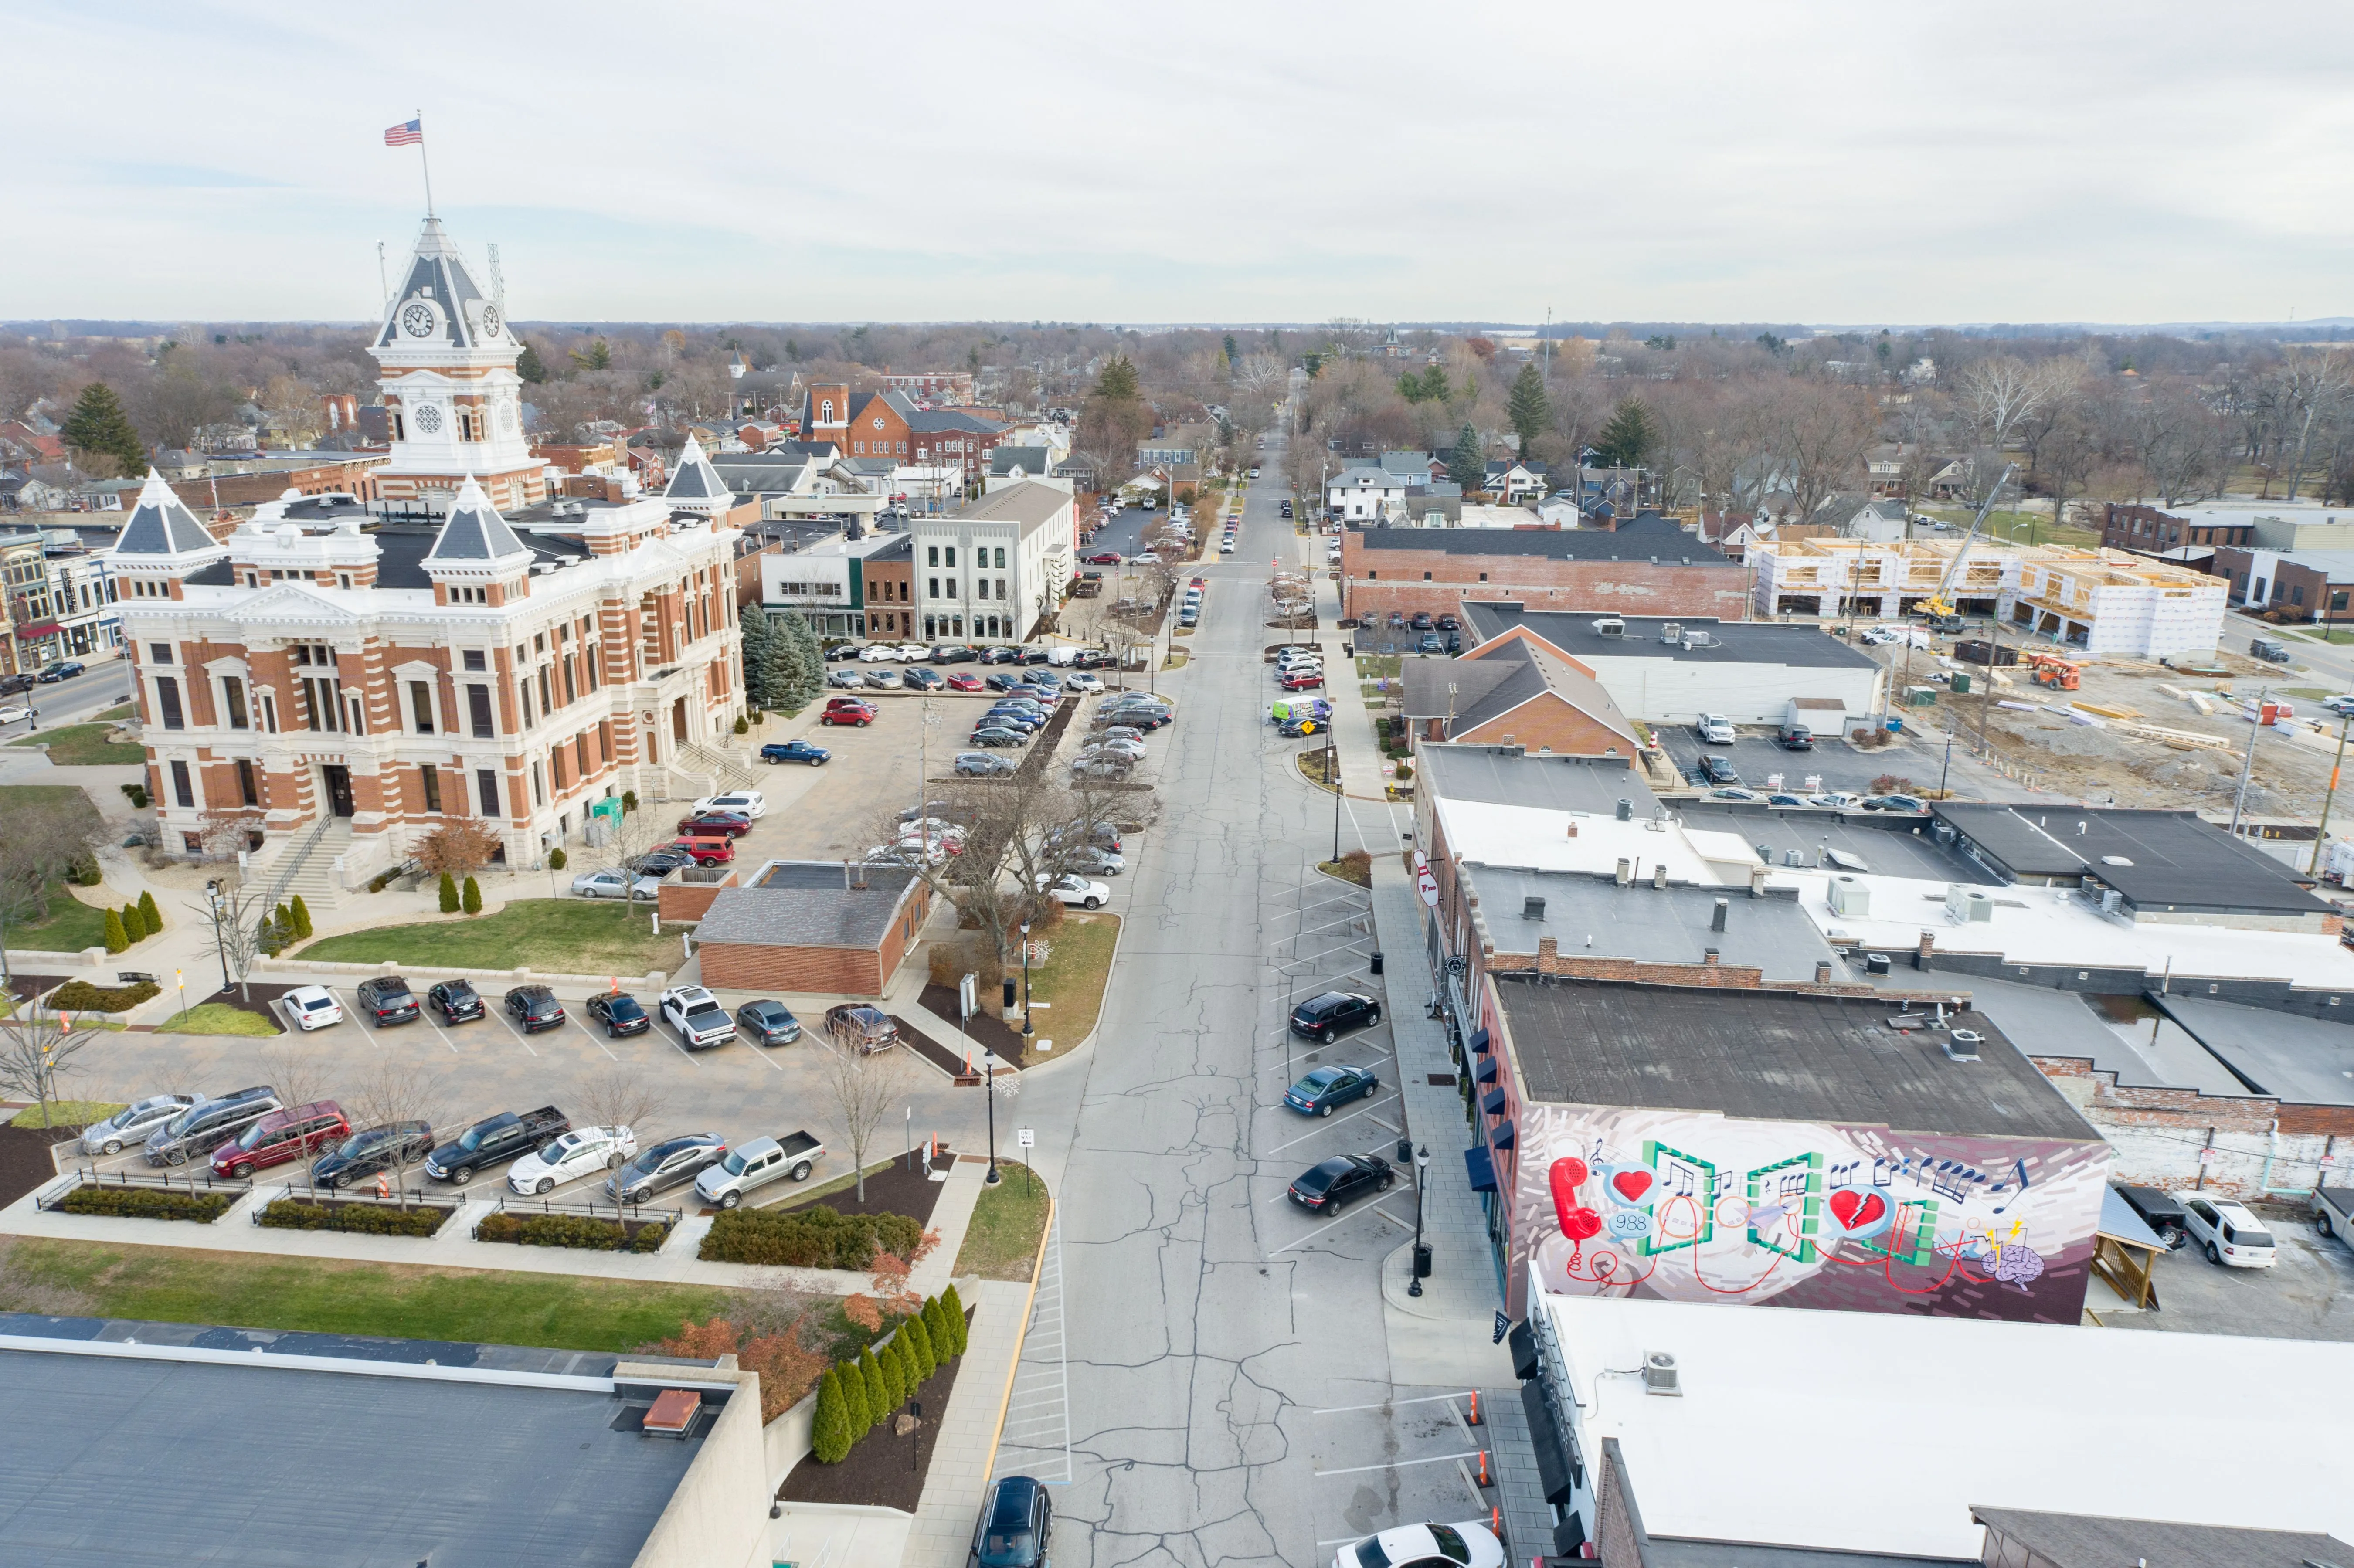 Aerial view of a small town with a prominent courthouse and a main street lined with buildings and parking areas.